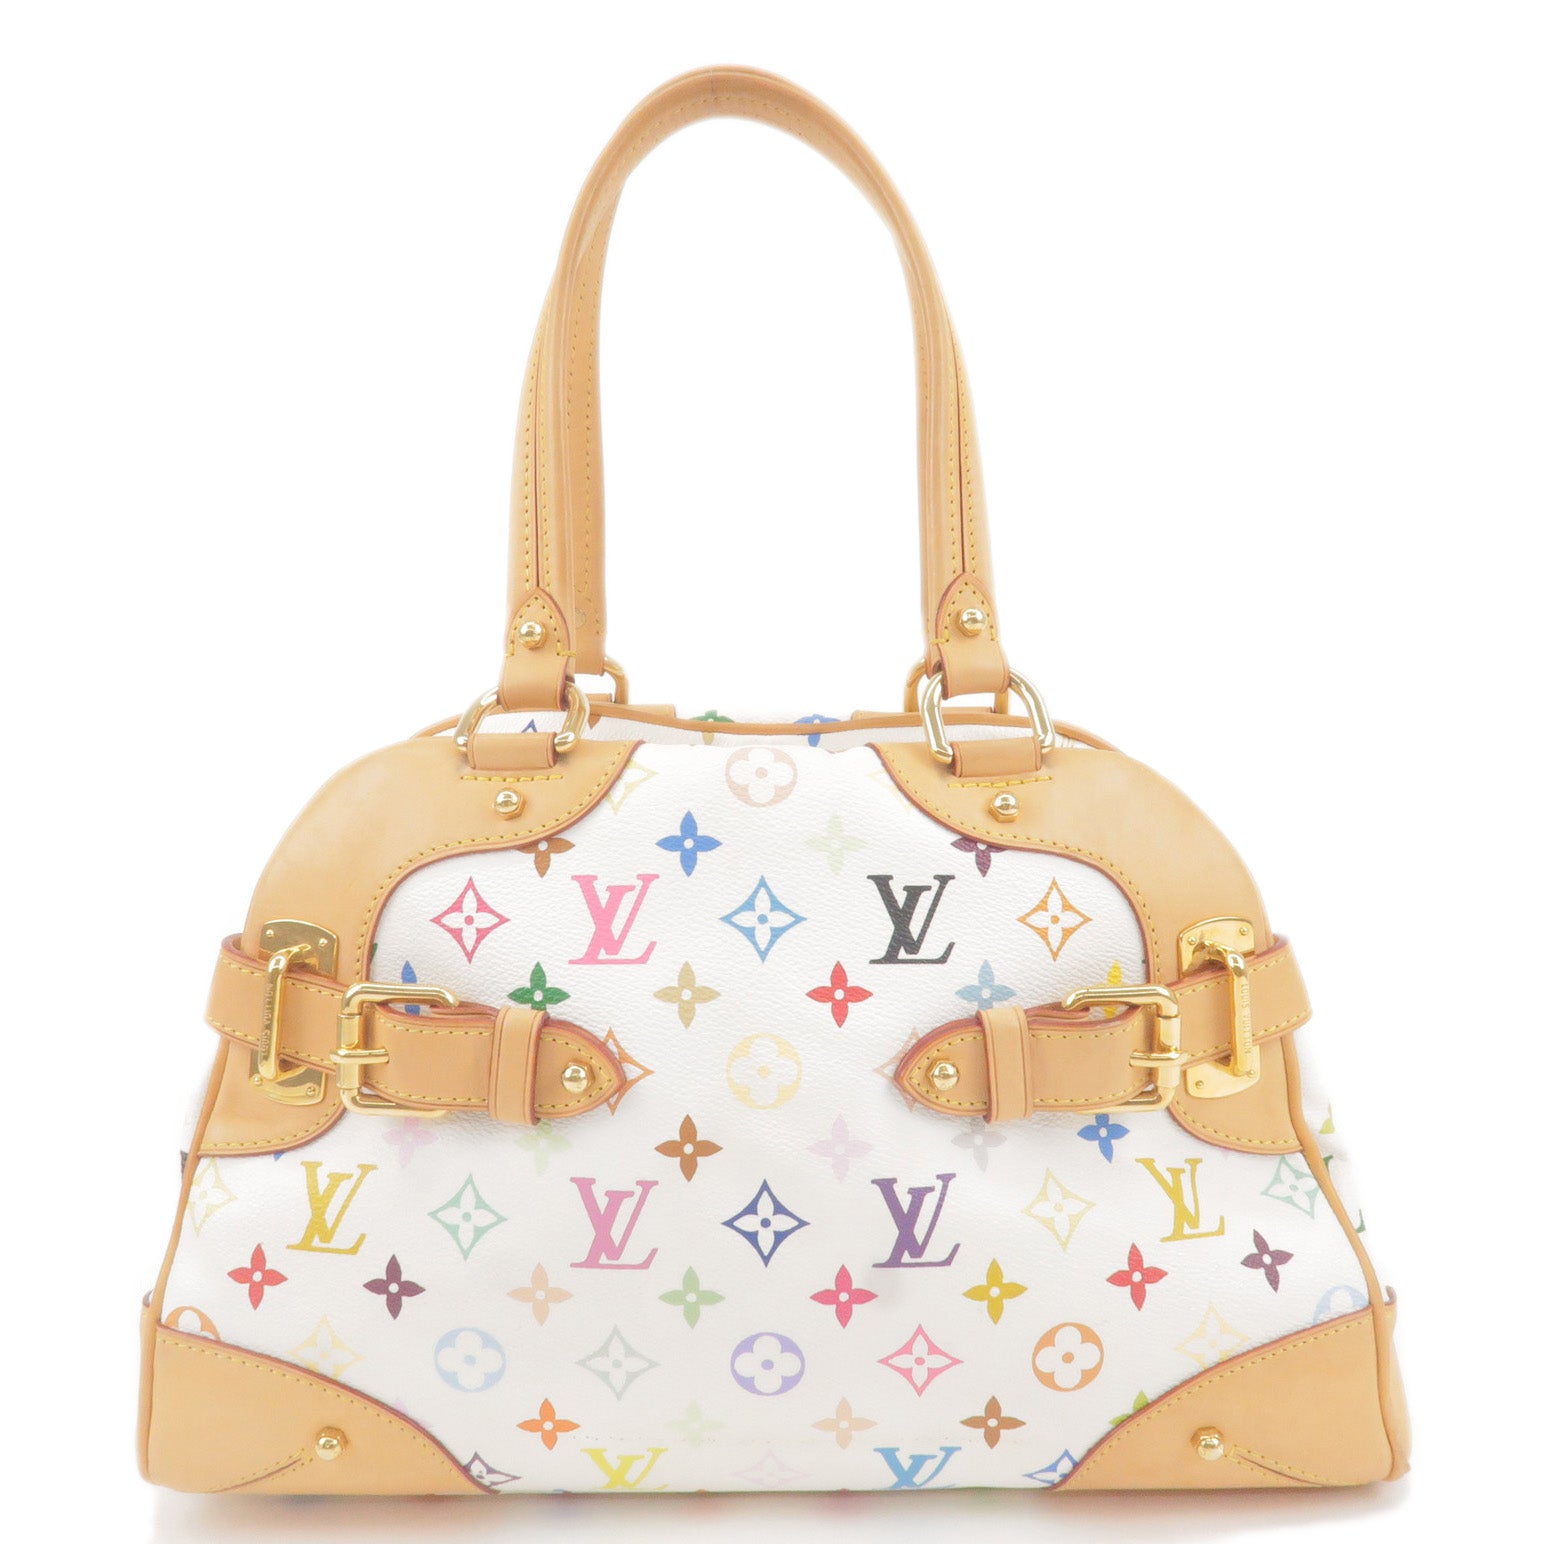 Bag - M40193 – Louis Vuitton Keepall Editions Limitées travel bag in blue  and white monogram canvas - Vuitton - Color - Hand - Monogram - Louis - Louis  Vuitton Stephen Sprouse Leopard Speedy - Multi - Claudia